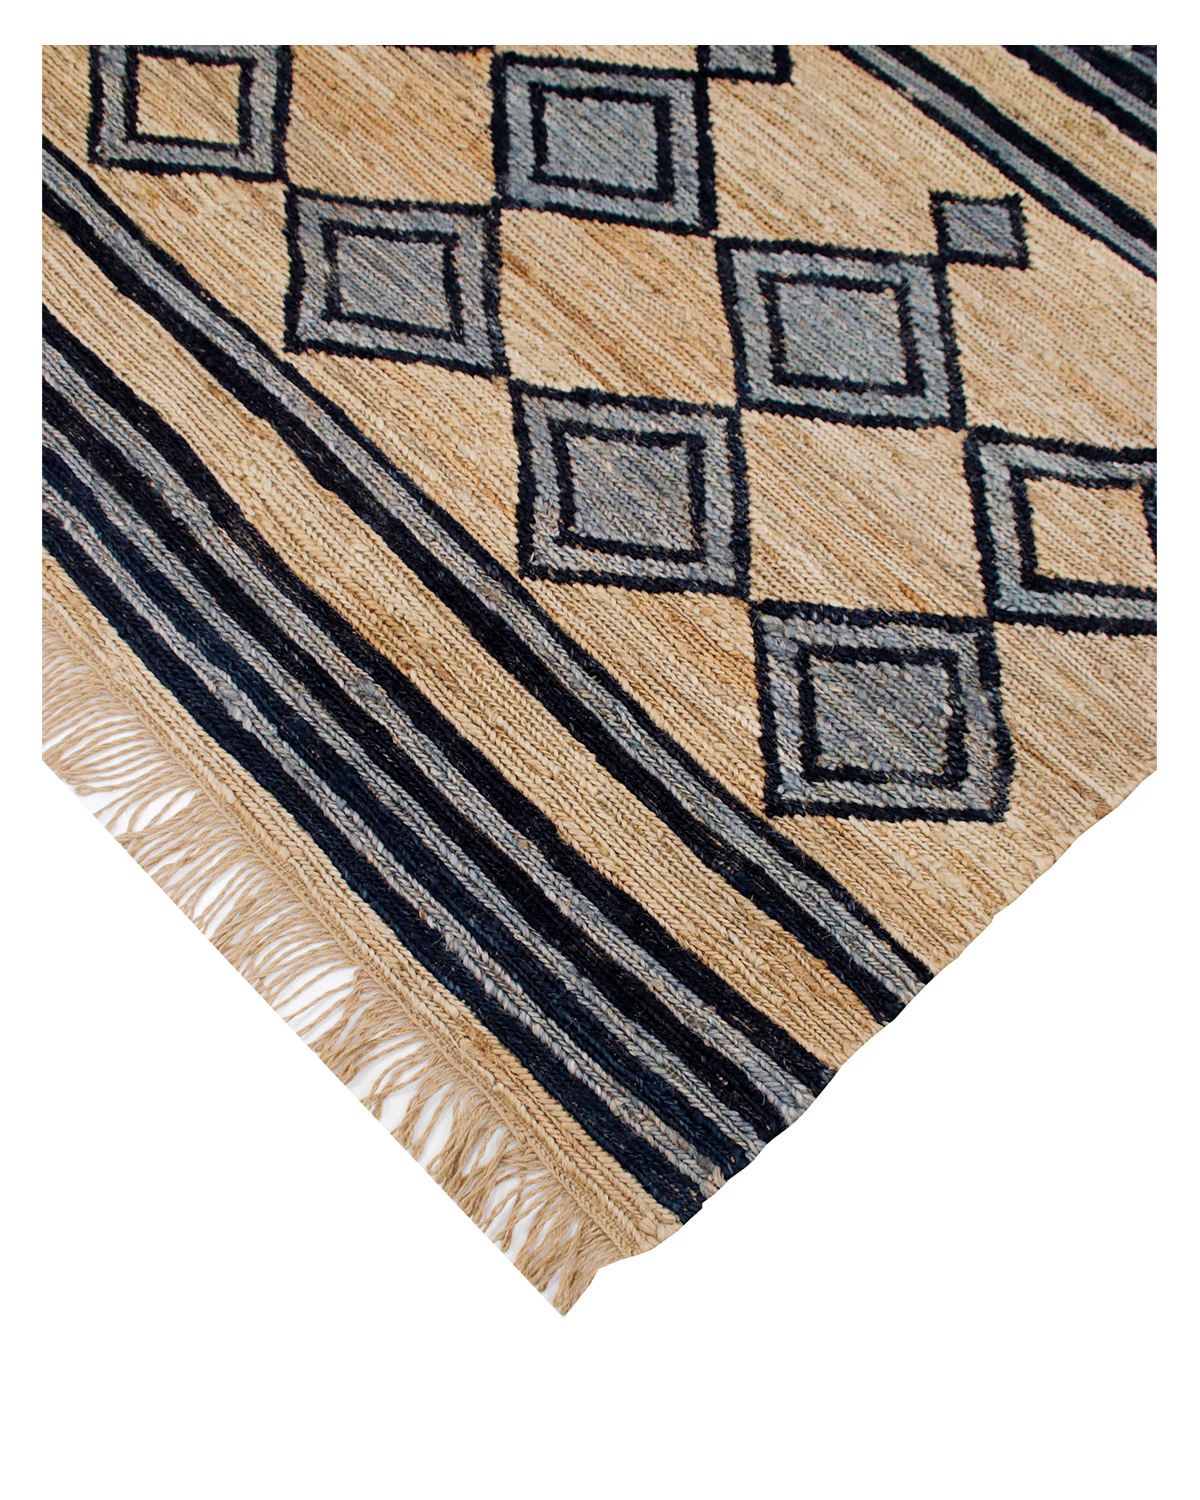 Modern Hand-crafted Rug (TR-882)